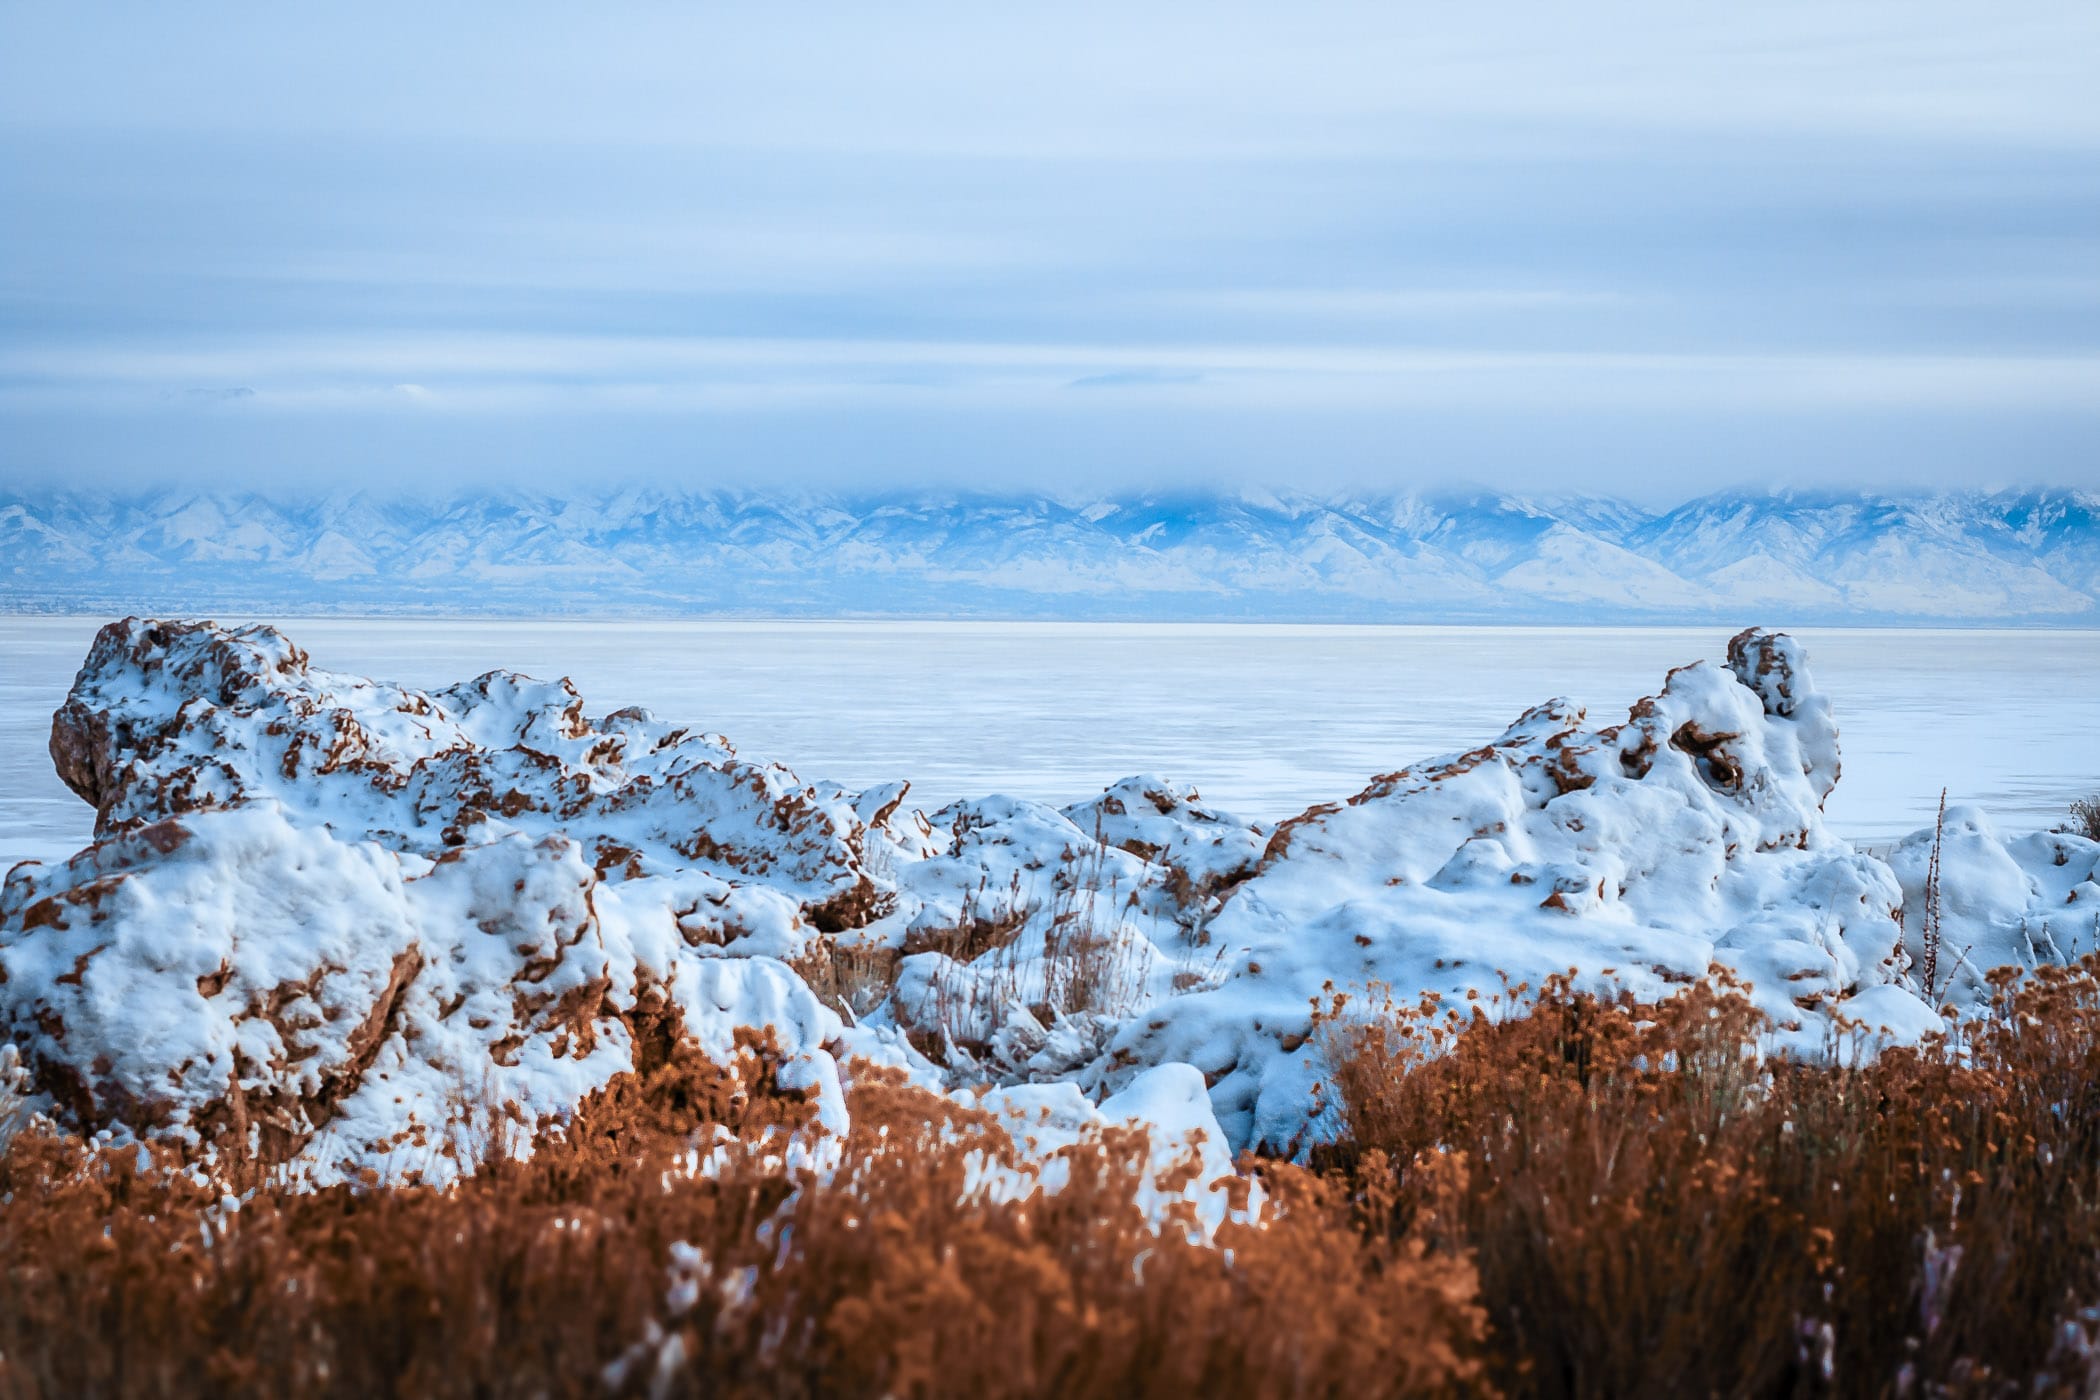 Distant winter mountains line the horizon as seen from the Great Salt Lake's Antelope Island, Utah.